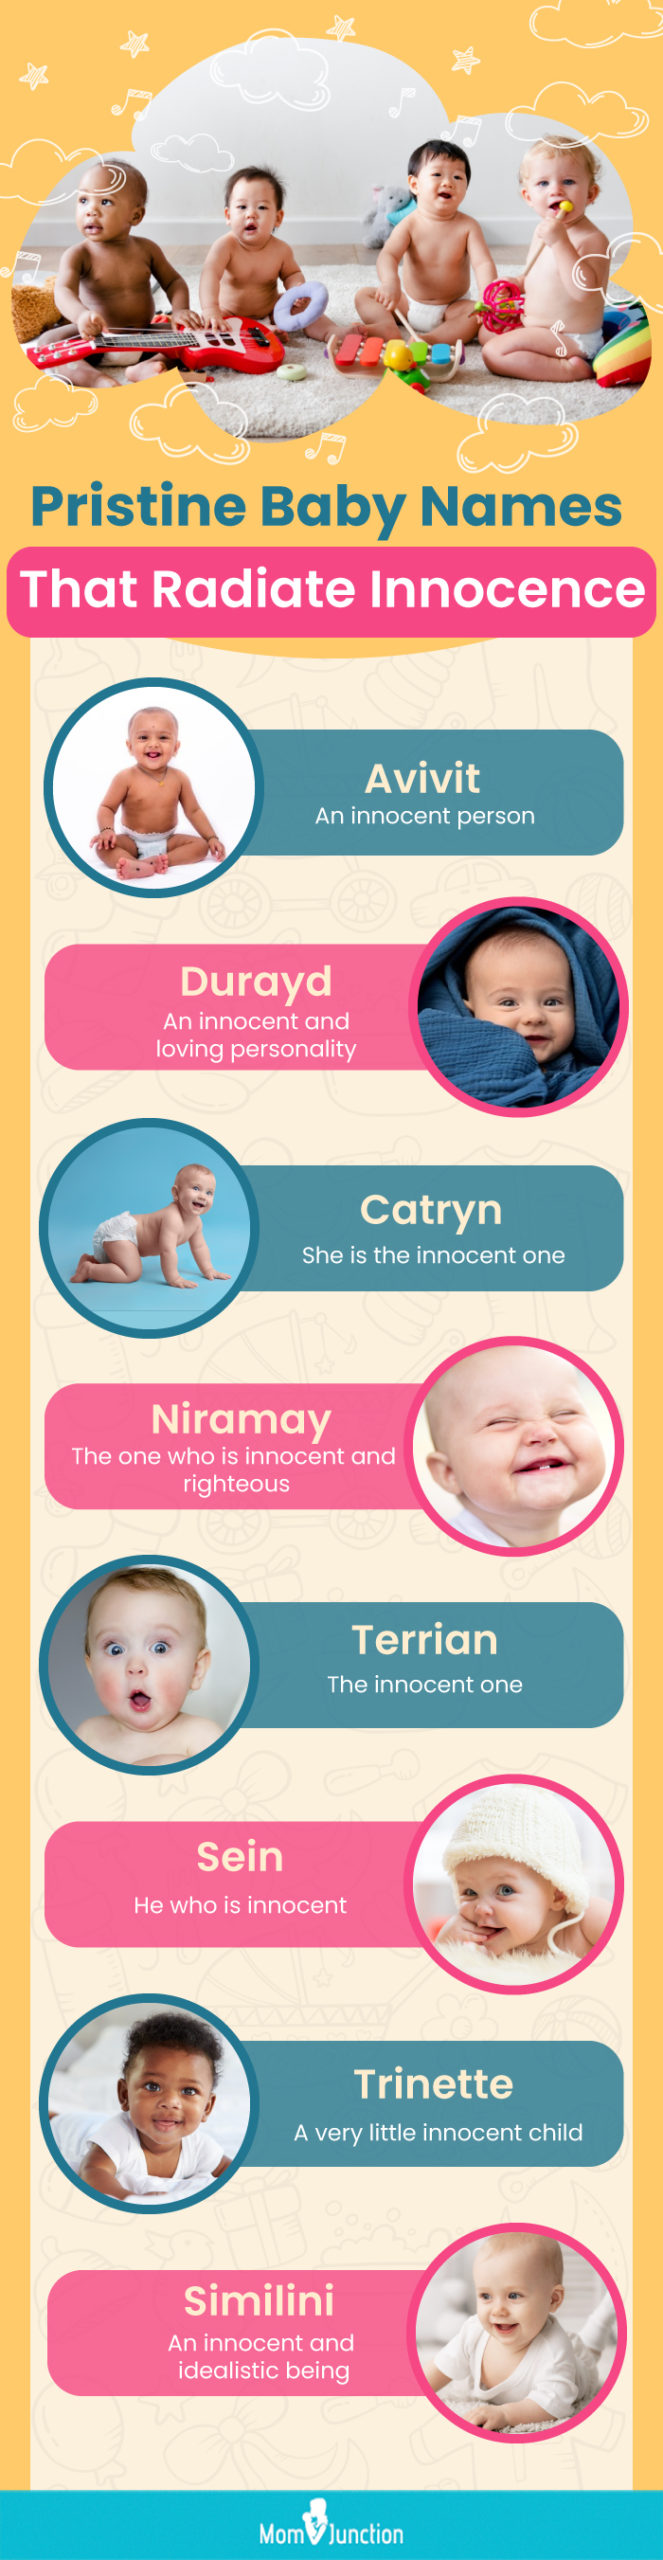 pristine baby names that radiate innocence (infographic)